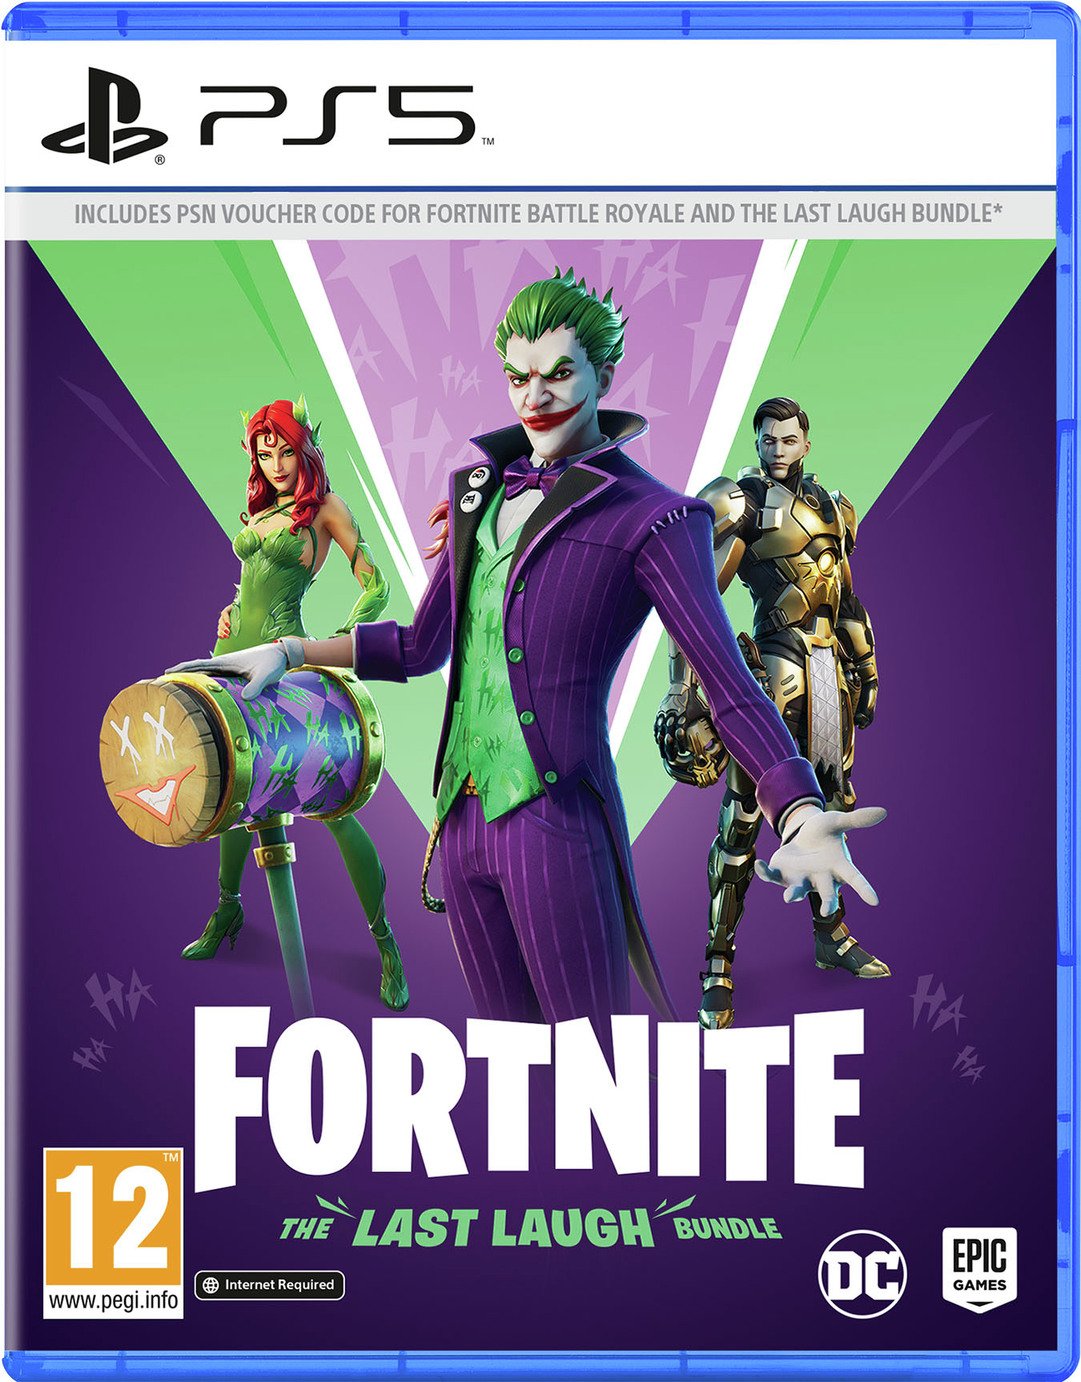 Ps4 Fortnite Bundle Argos Off 73 Online Shopping Site For Fashion Lifestyle